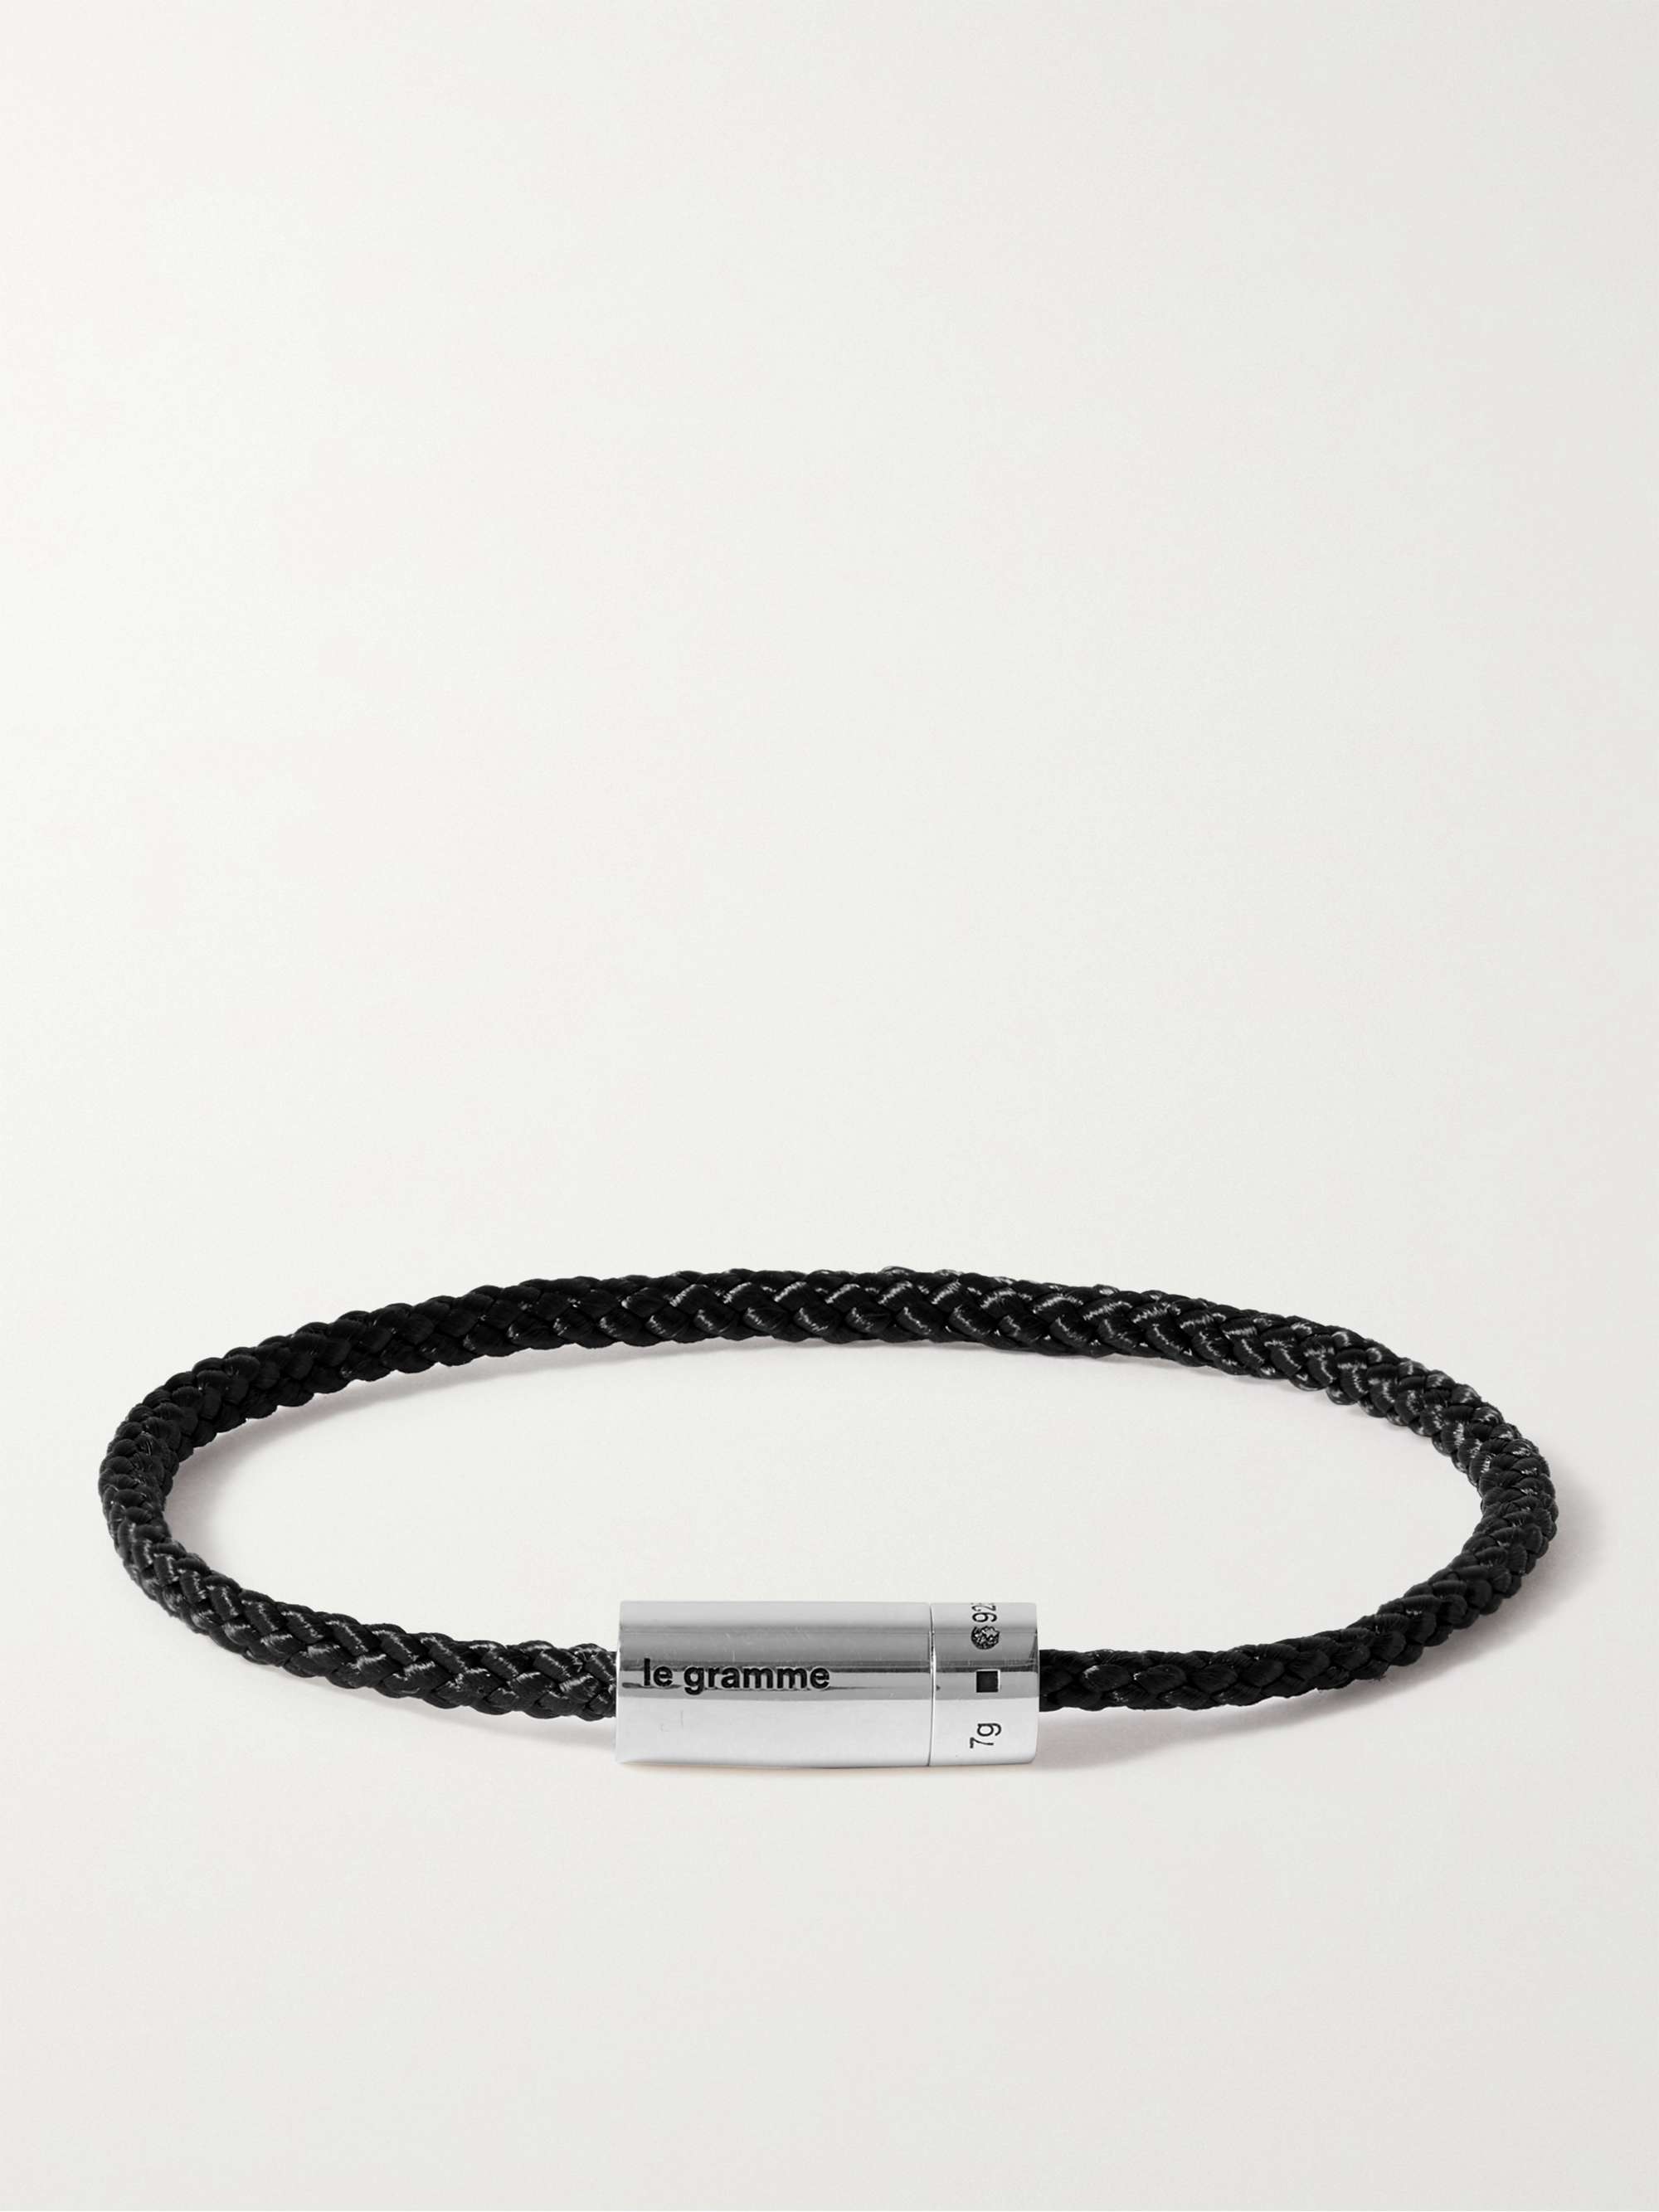 LE GRAMME 5g Braided Cord and Sterling Silver Bracelet,Black